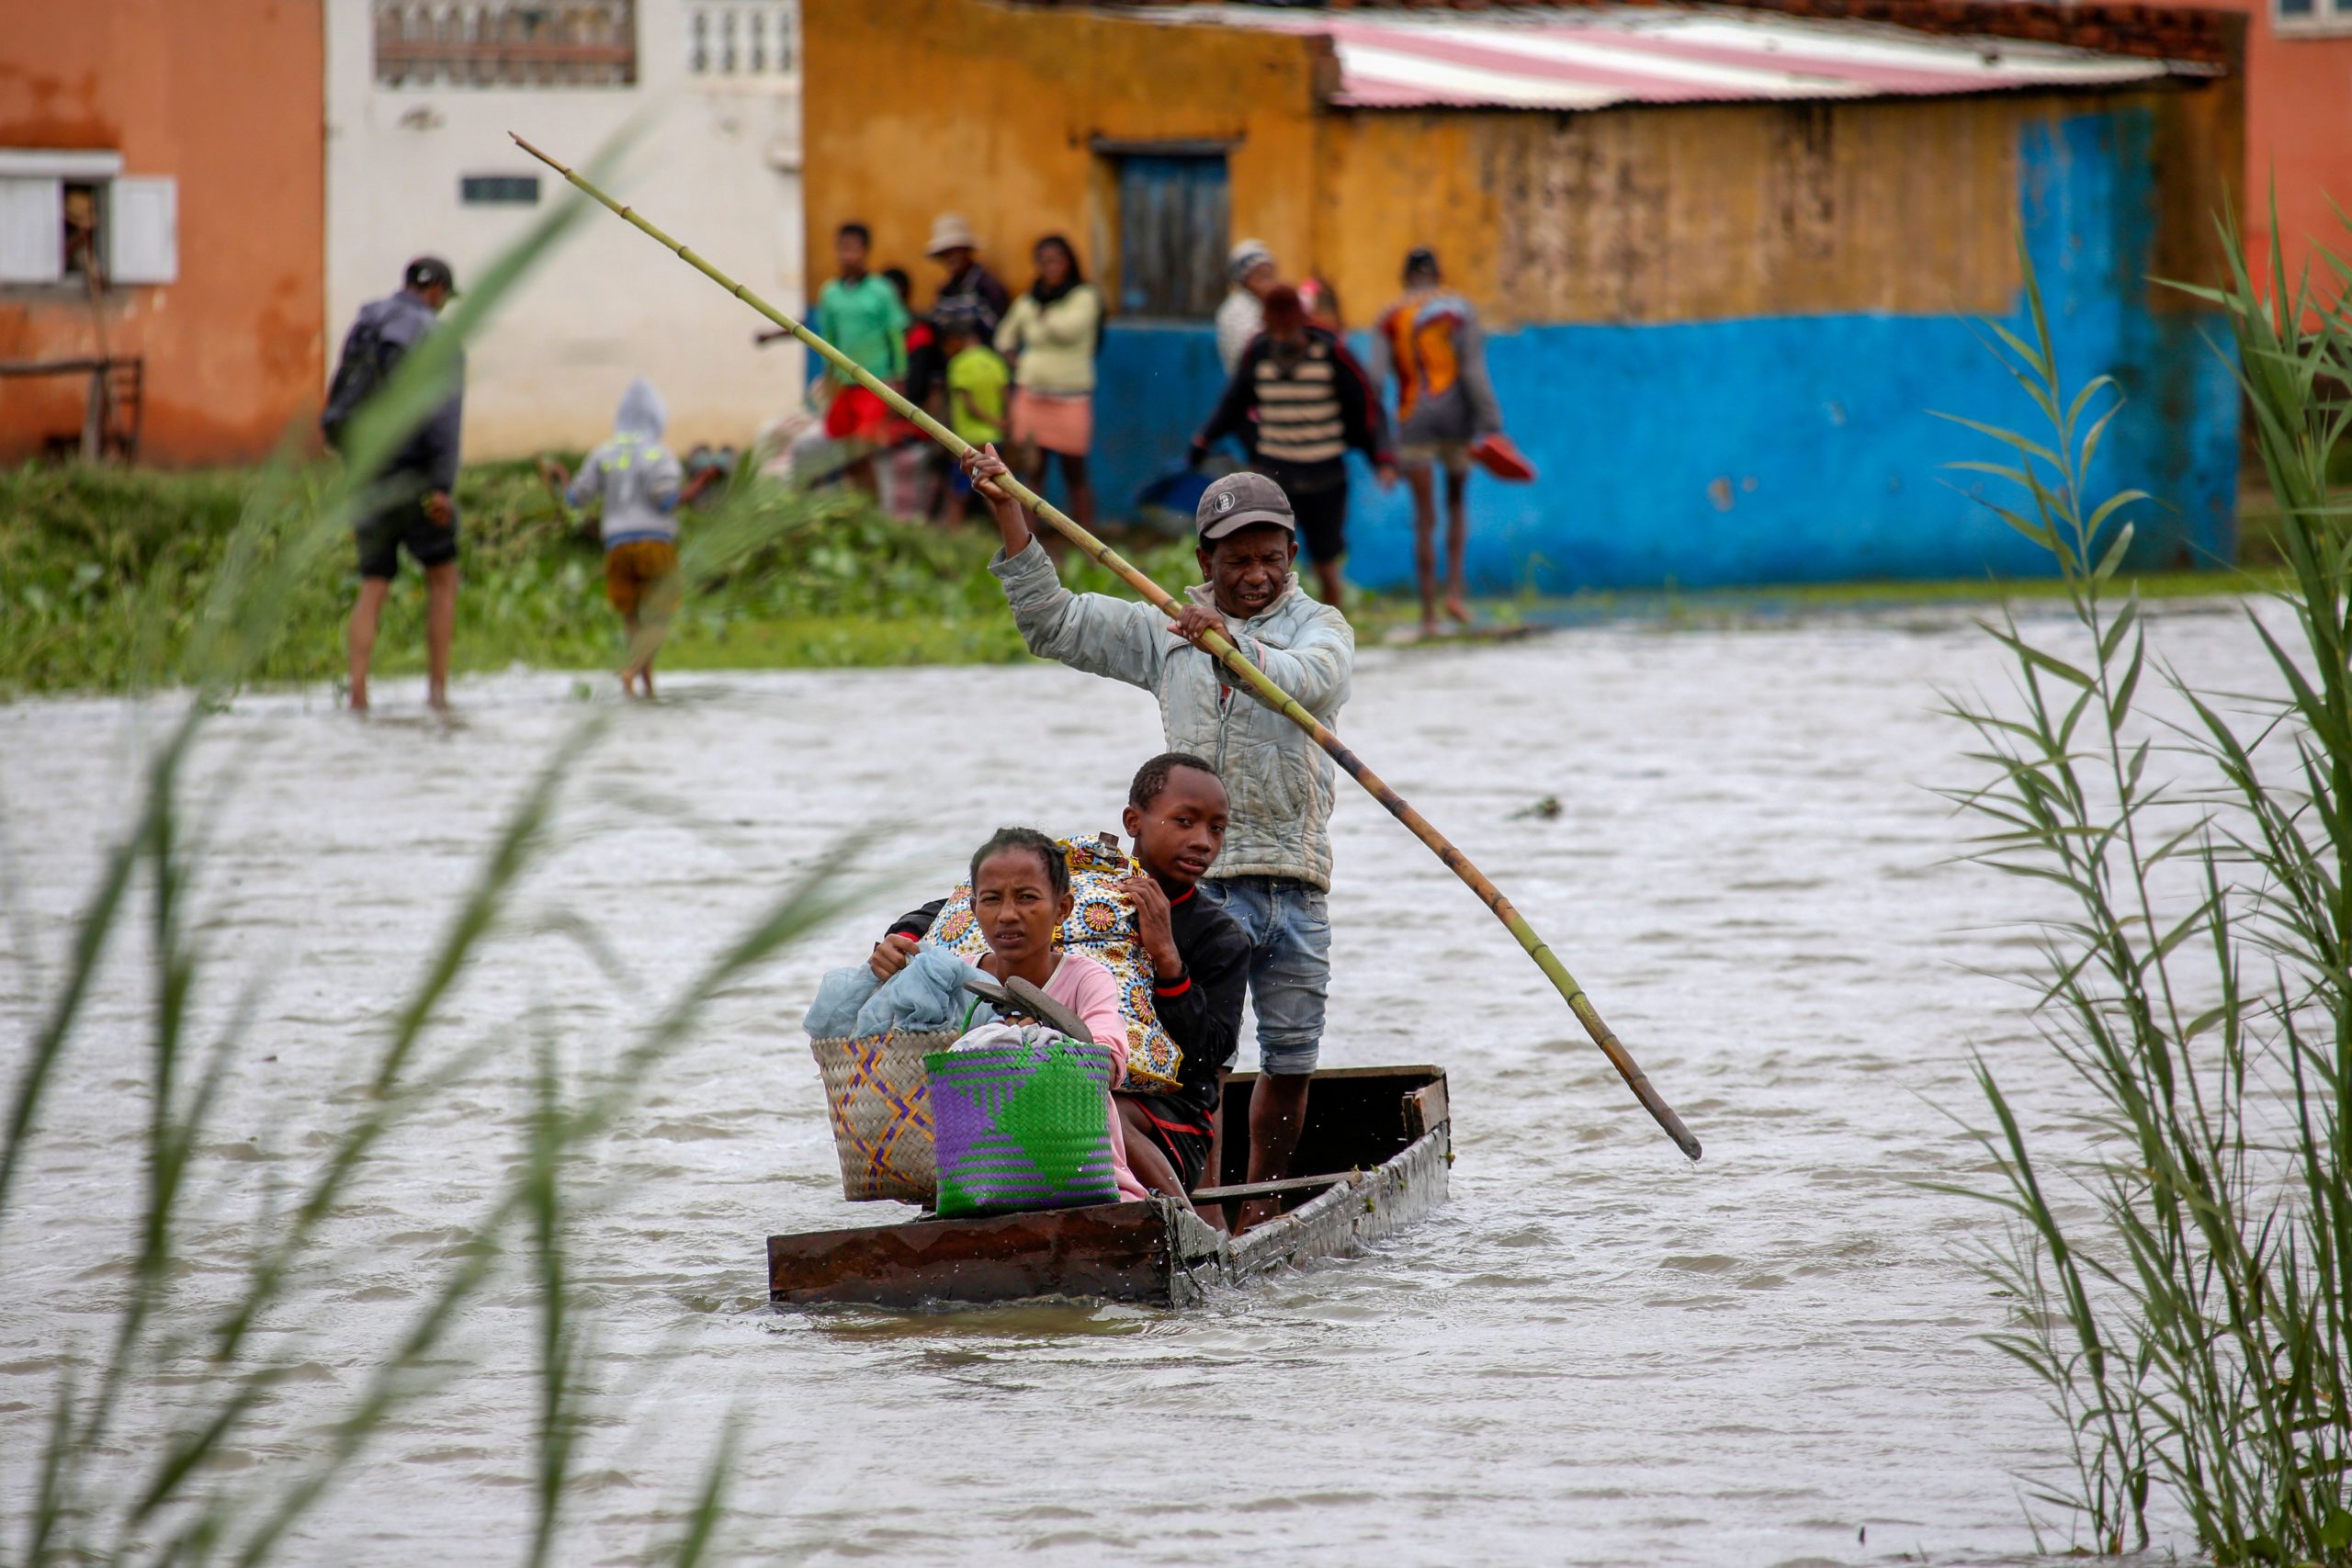 A family take their belongings after their home was flooded after a week long of heavy rain, in Antananarivo, Madagascar, Monday, Jan. 24. (Photo: Alexander Joe, AP)